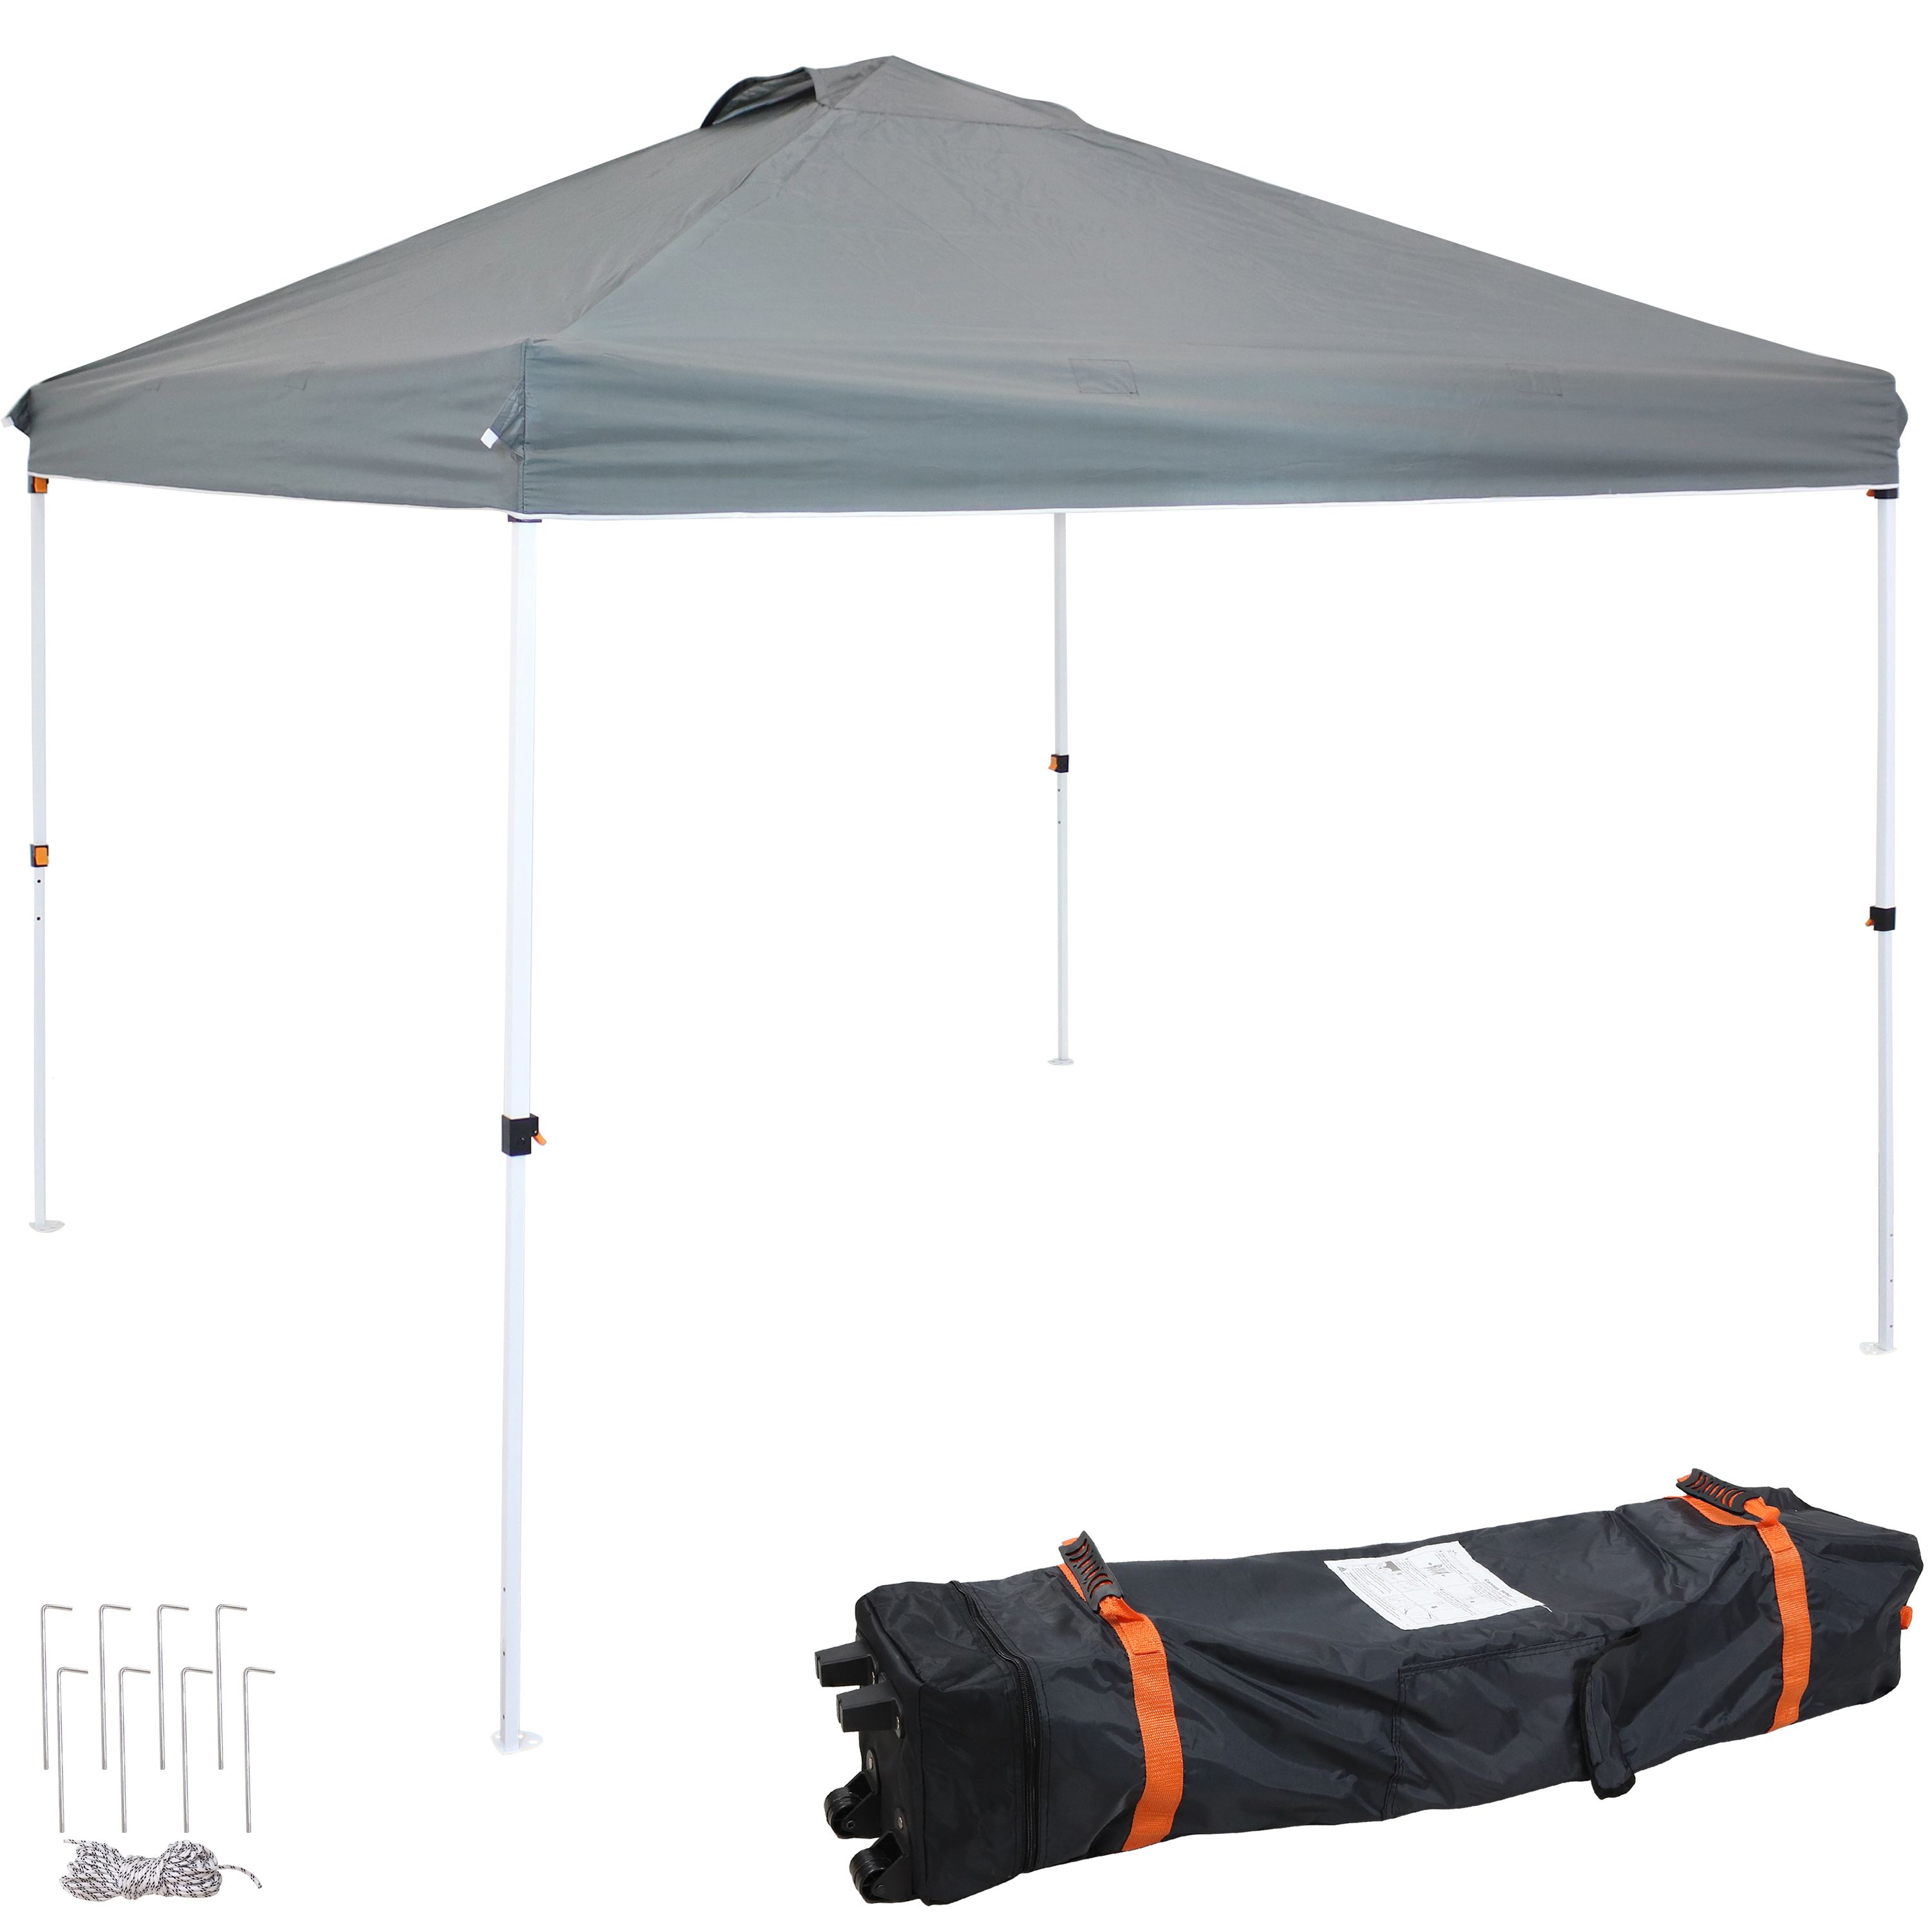 Sunnydaze 12x12 Foot Premium Pop-Up Canopy with Rolling Carry Bag - Gray